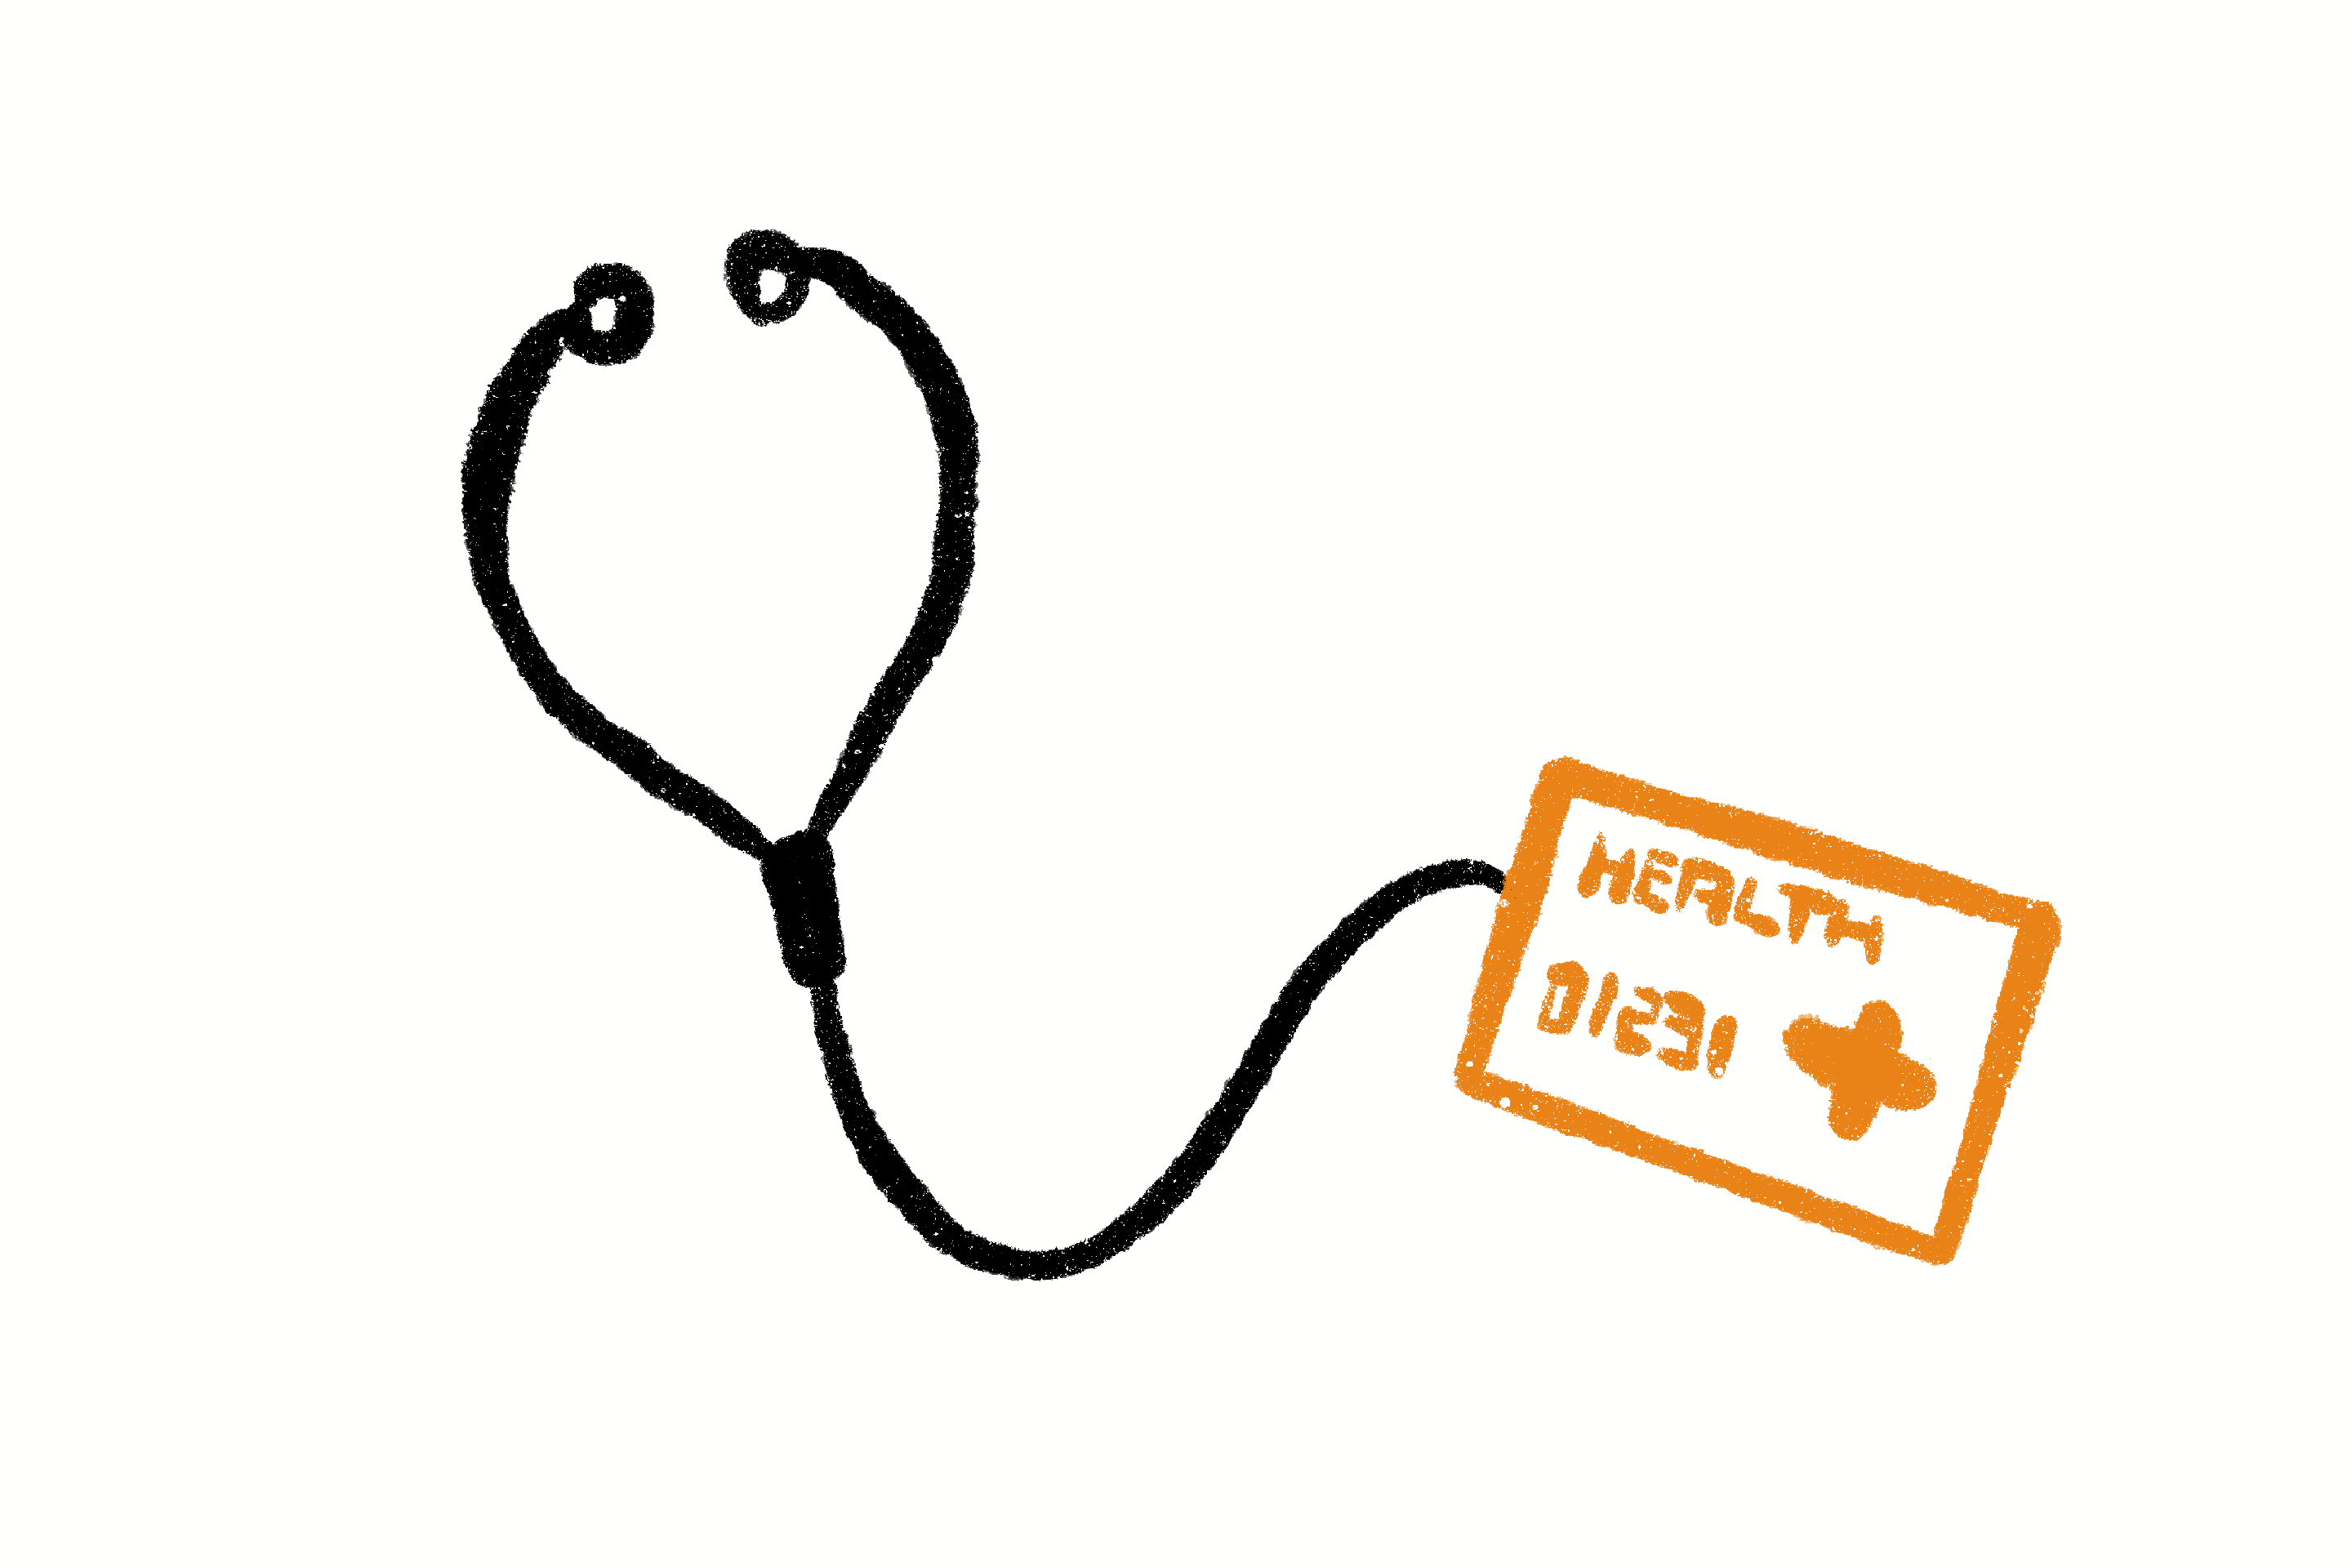 Stethoscope connected to a health insurance card with a cross and the numbers 01231.